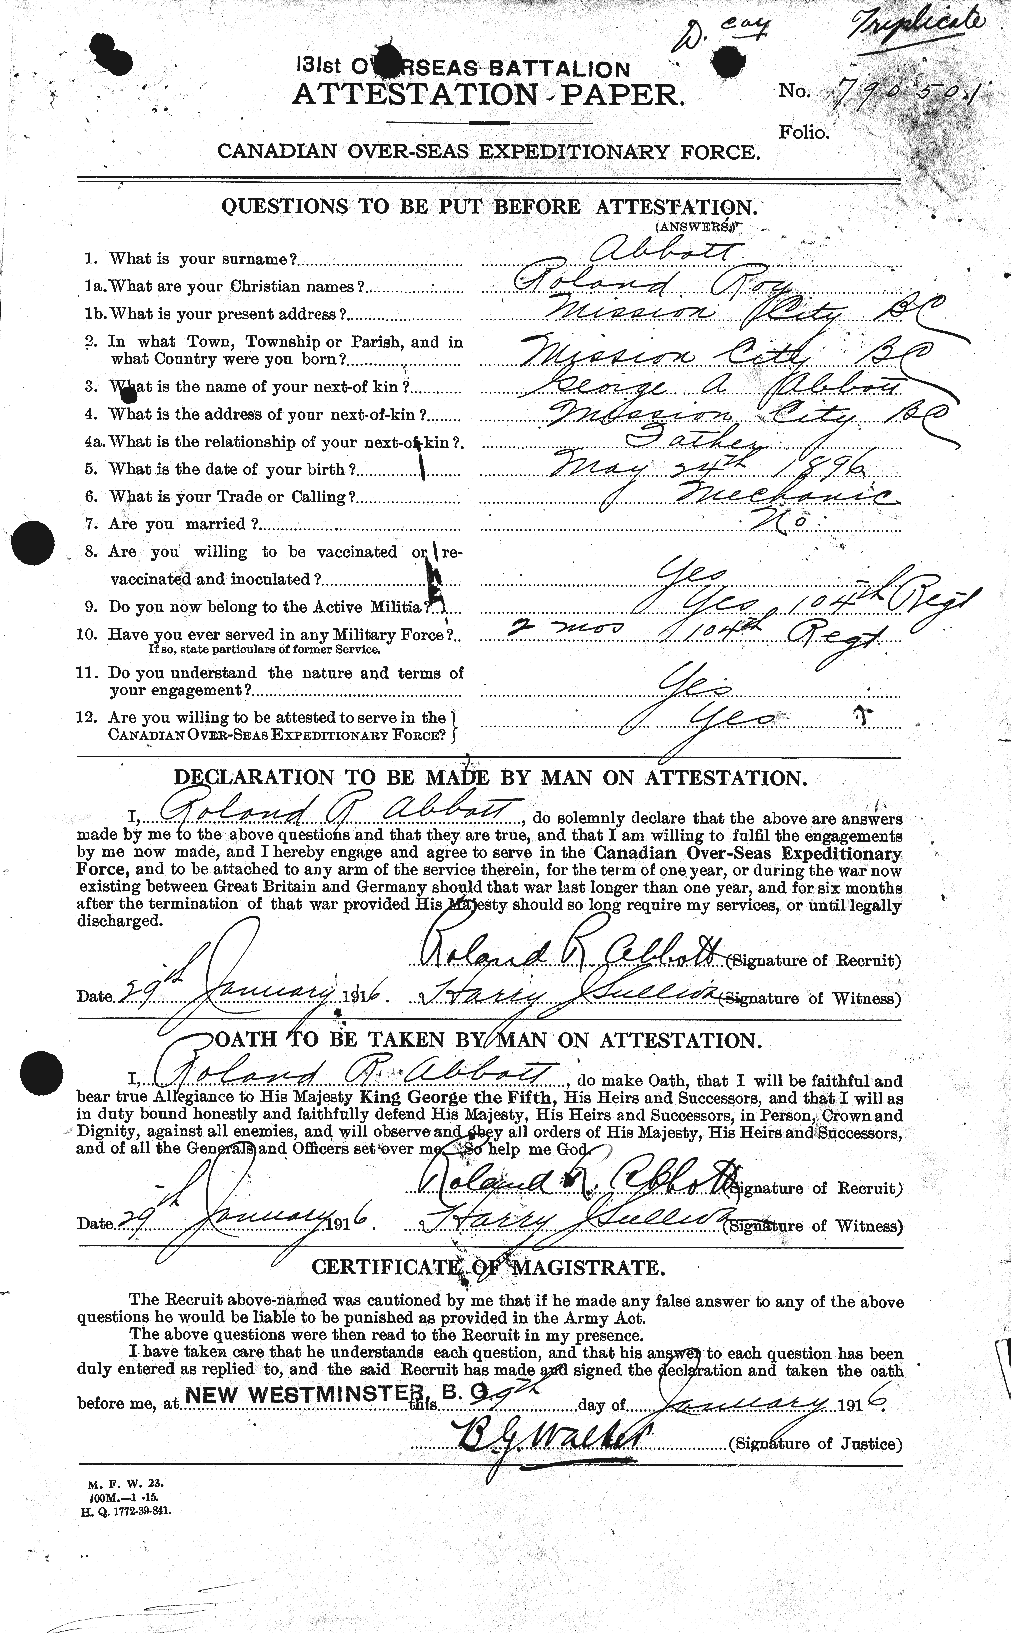 Personnel Records of the First World War - CEF 201080a